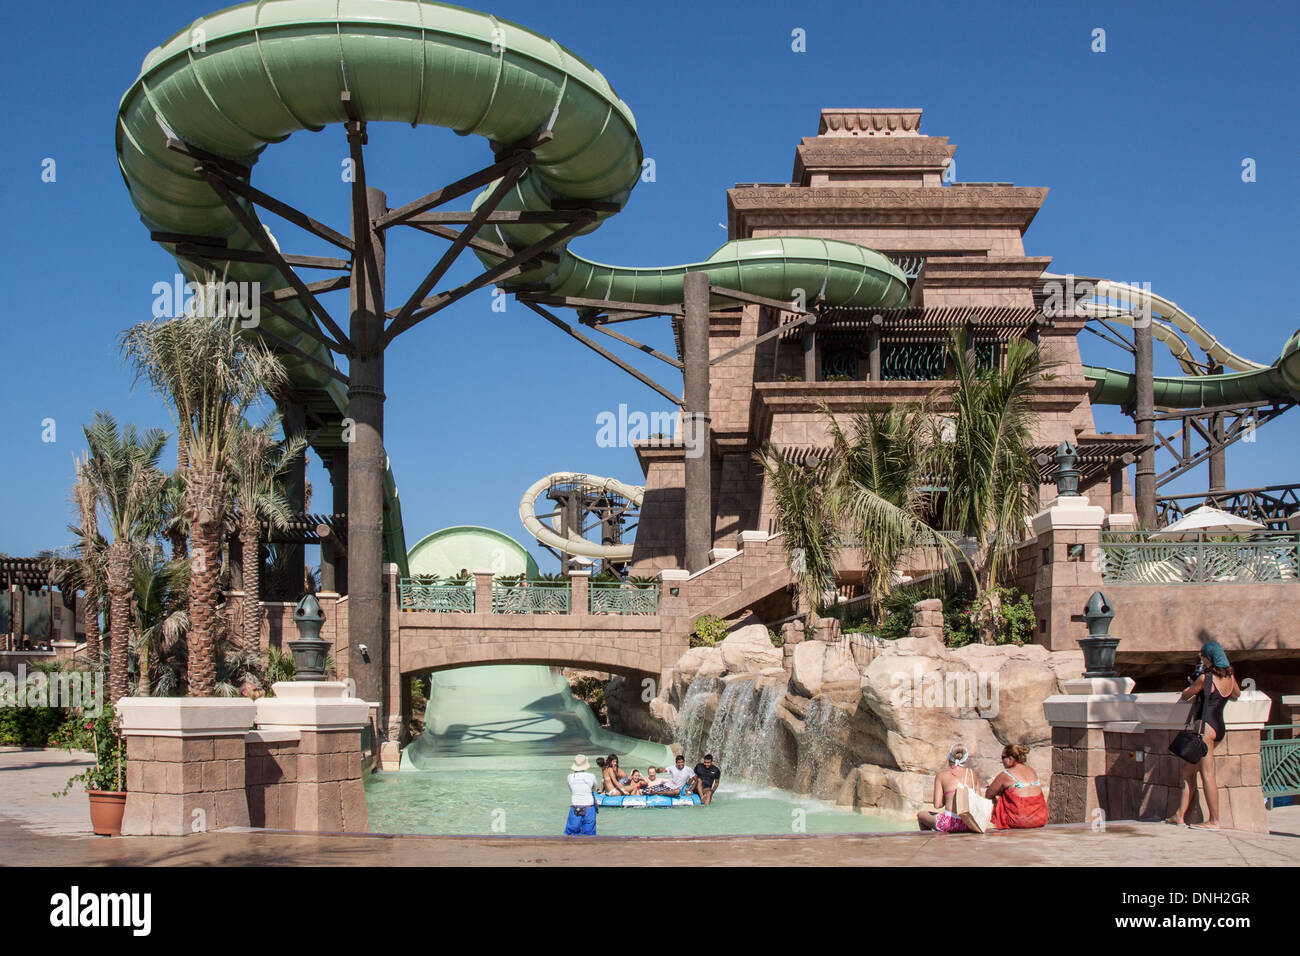 THE ATTRACTION CALLED THE POSEIDON TOWER IN THE AQUAVENTURE WATER PARK, ATLANTIS THE PALM TOURIST COMPLEX, PALM JUMEIRAH, DUBAI, UNITED ARAB EMIRATES, MIDDLE EAST Stock Photo